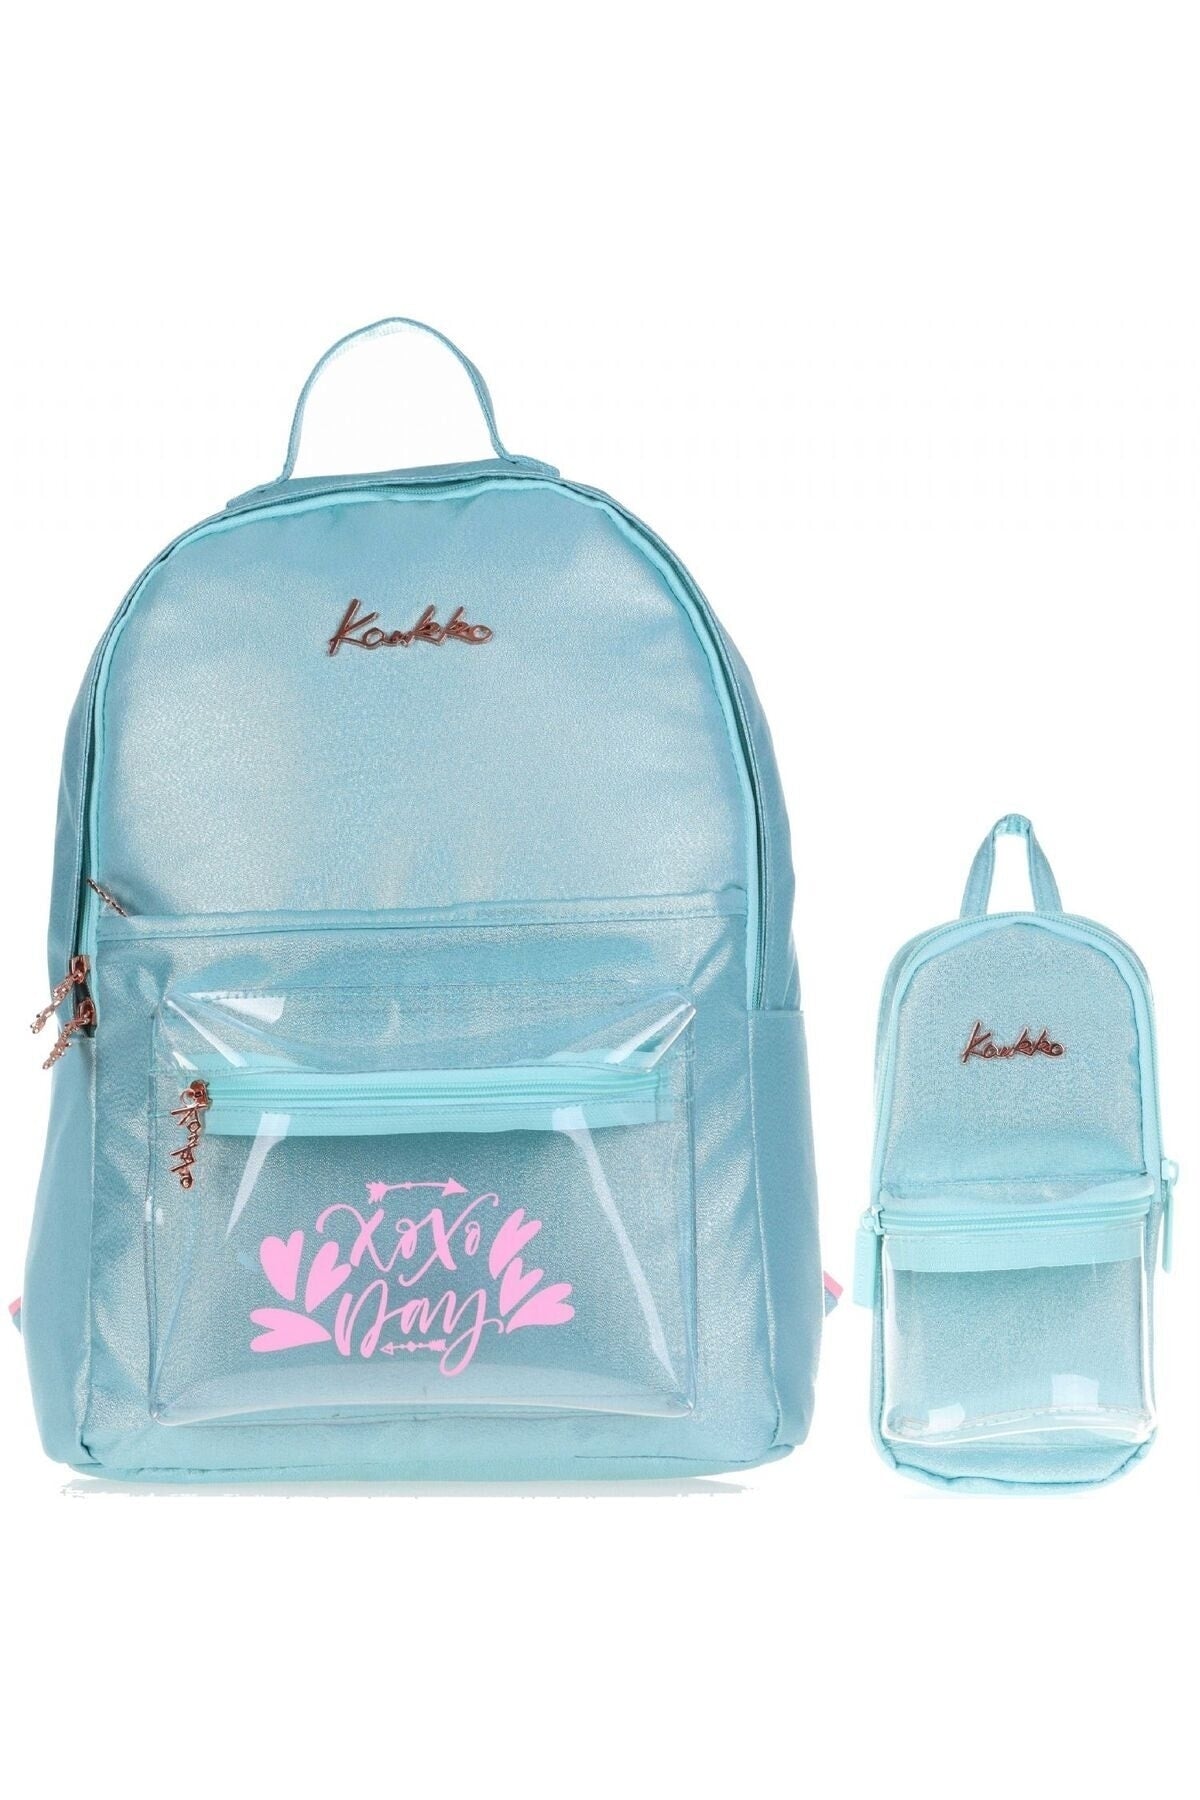 Transparent Turquoise Xoxo School Backpack and Pencil Holder Set - Girls